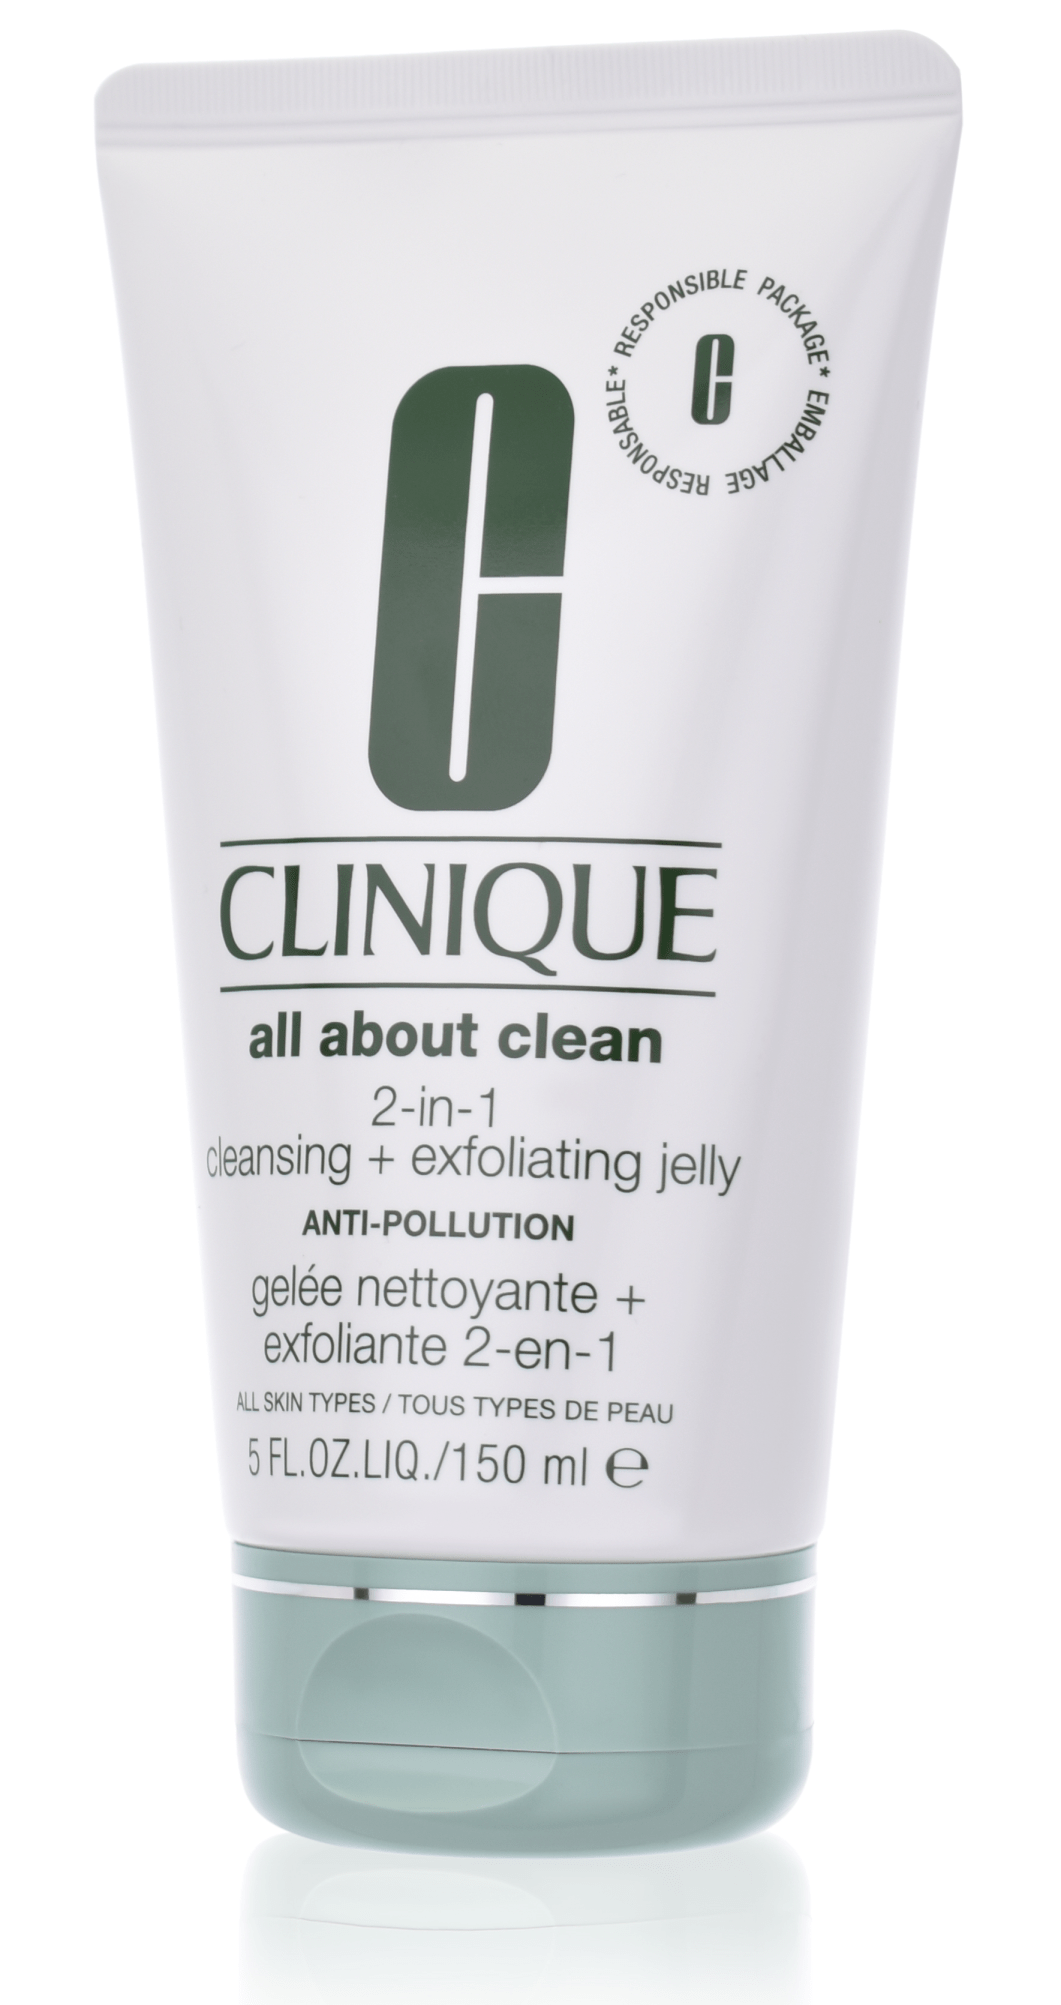 Clinique All About Clean - 2-in-1 Cleansing + Exfoliating Jelly 150 ml